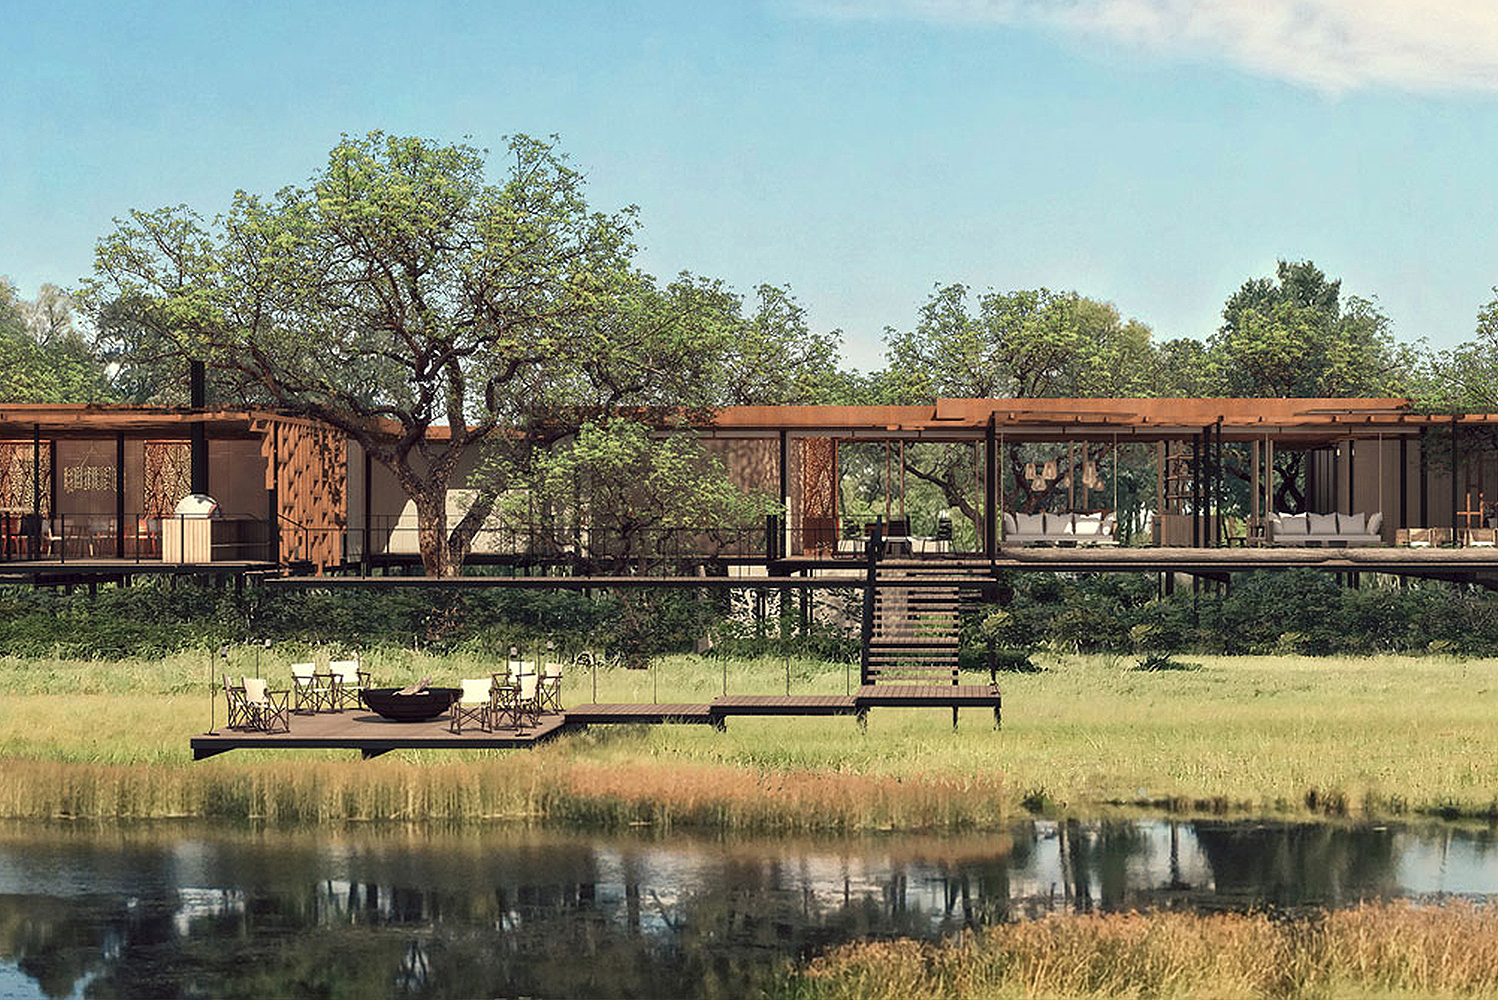 Wilderness Safaris is slated to open Qorokwe Camp a new Wilderness Safaris Classic Camp in Botswana this December